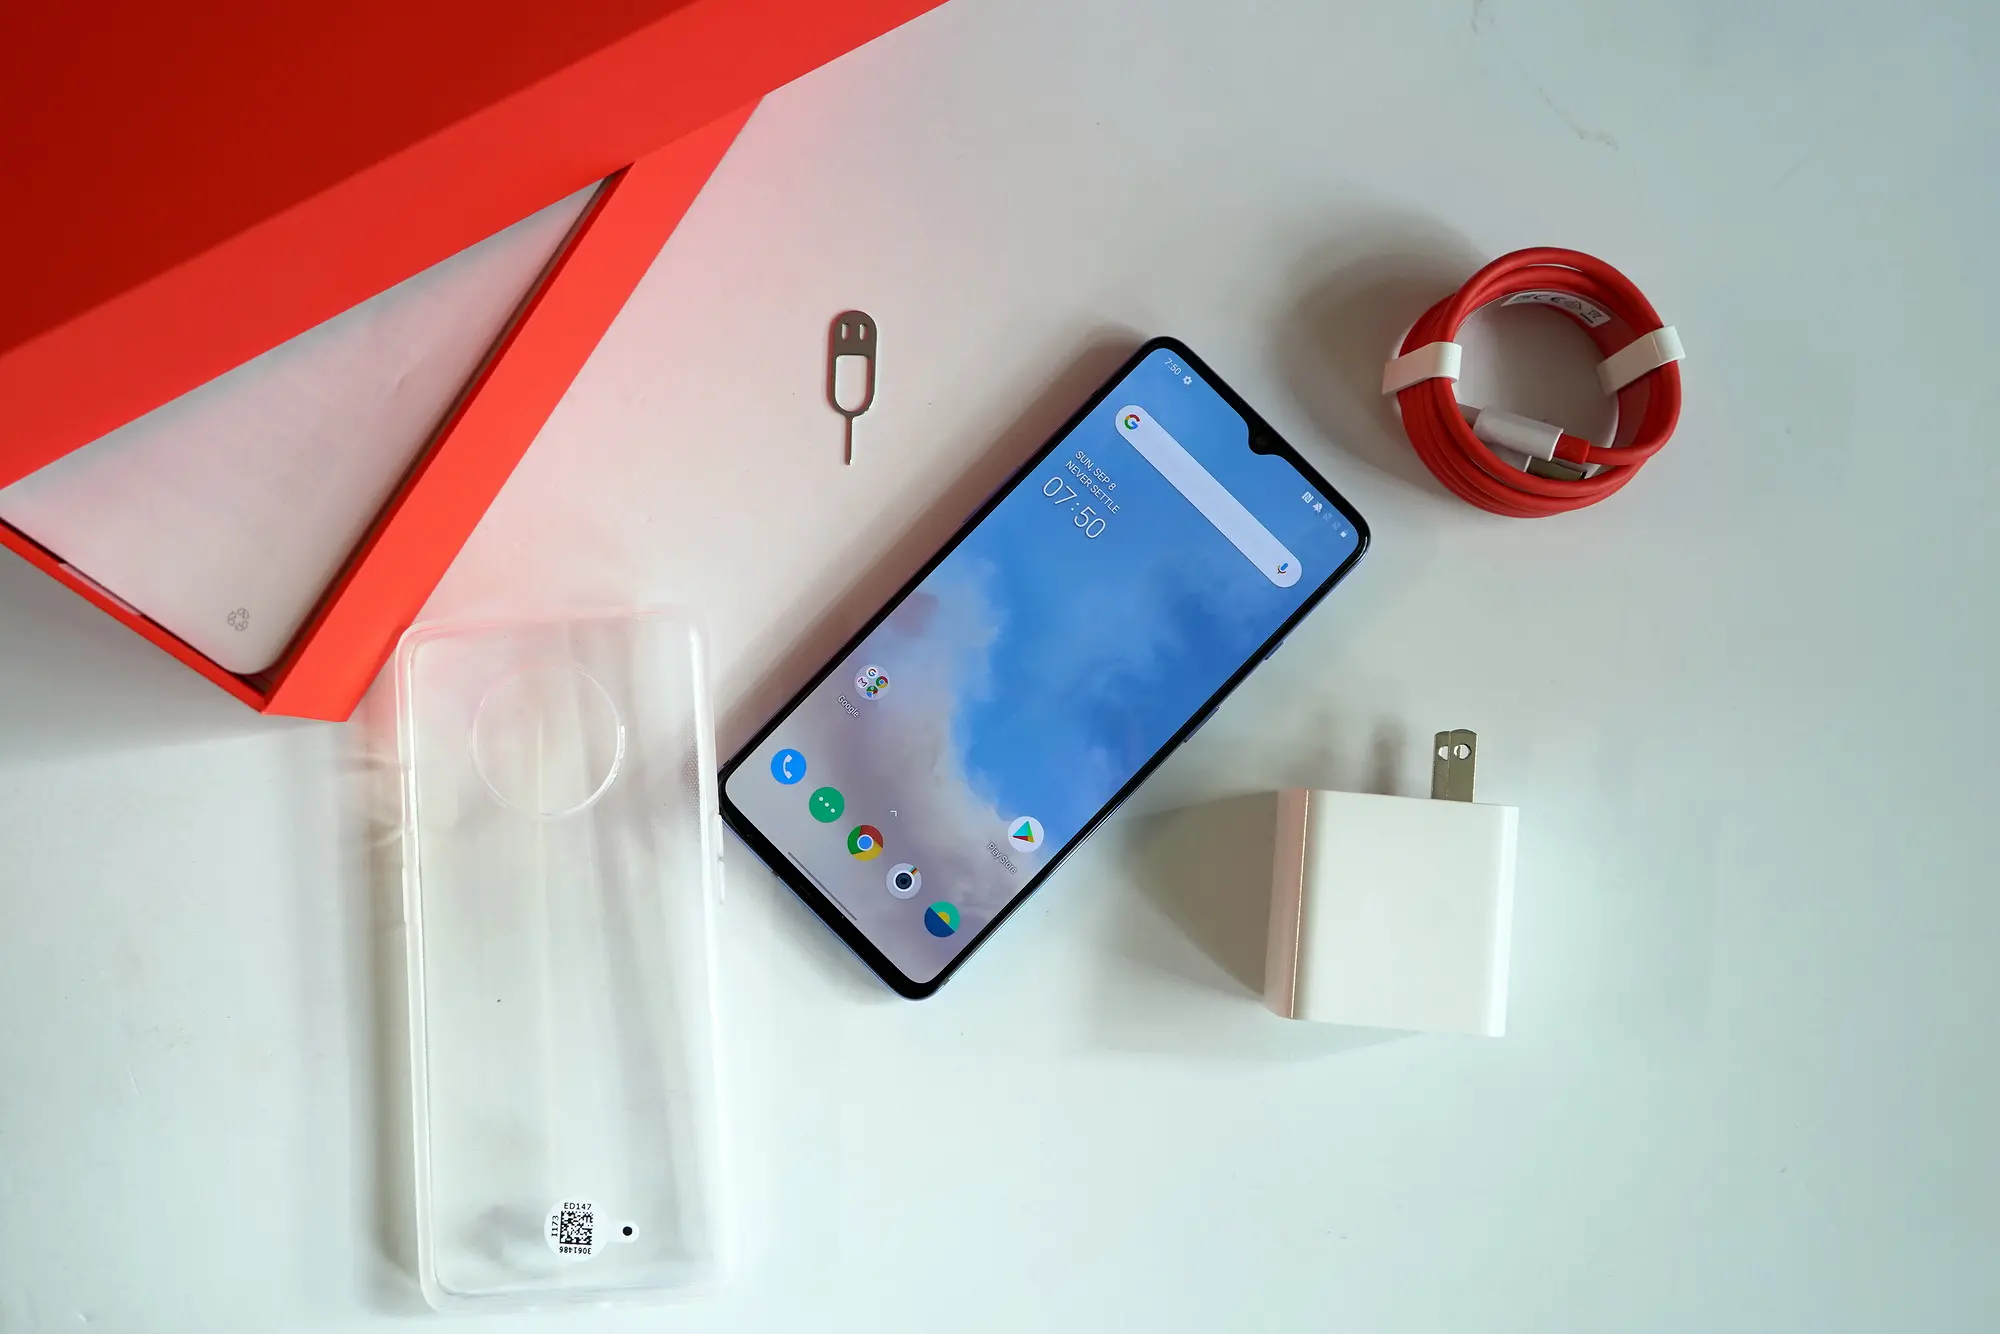 OnePlus devices are swapping left and right audio channels when connecting  headphones